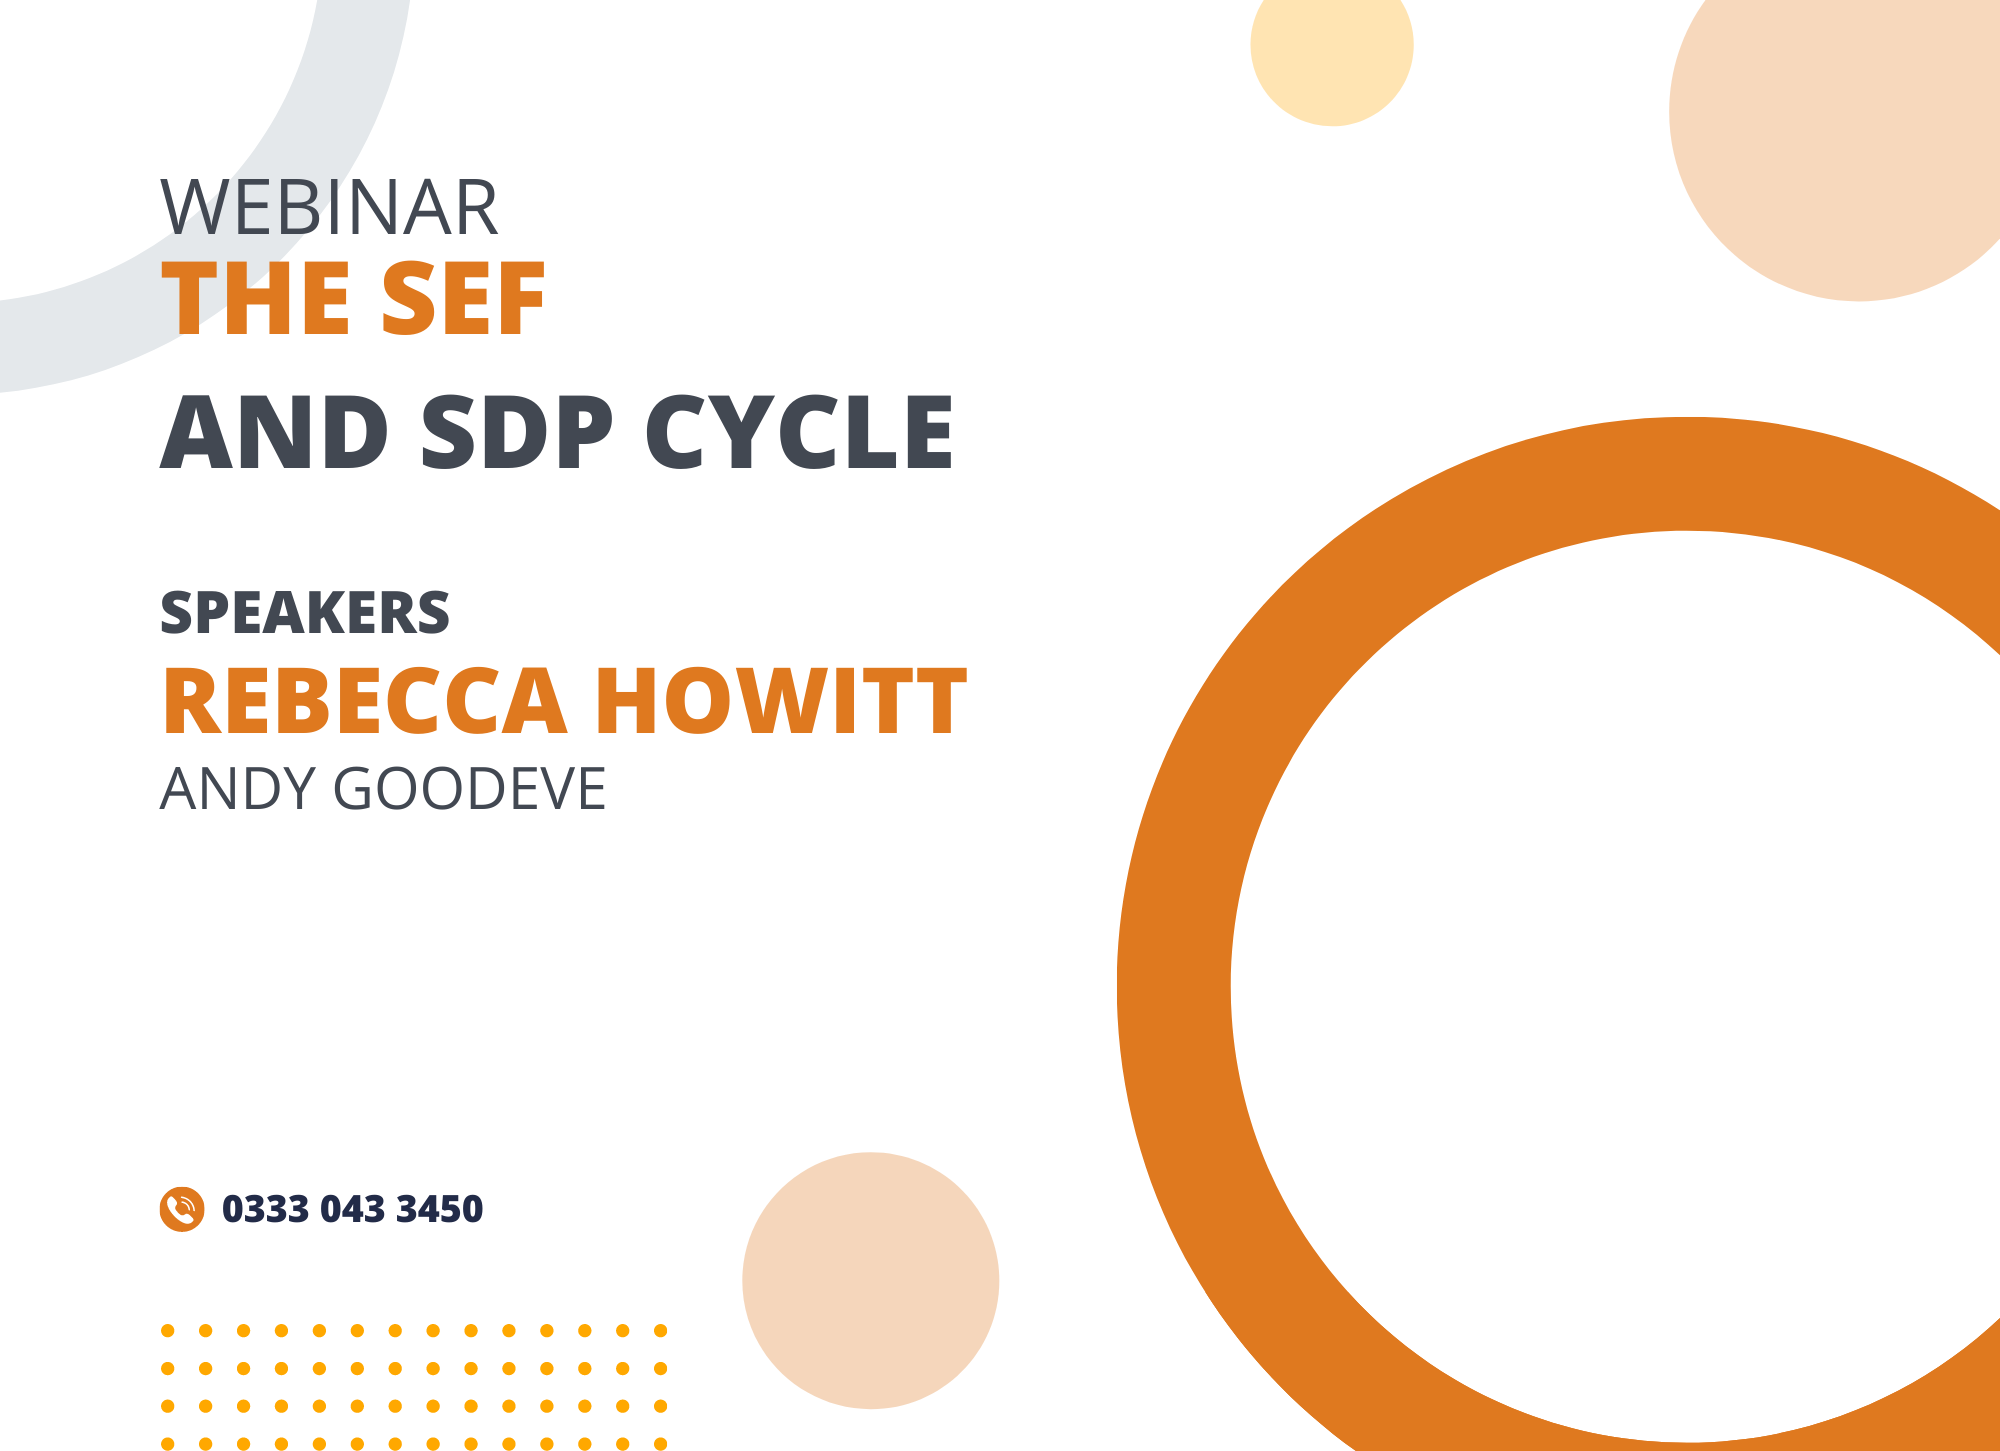 The SEF and SDP Cycle – how to use iP to effectively